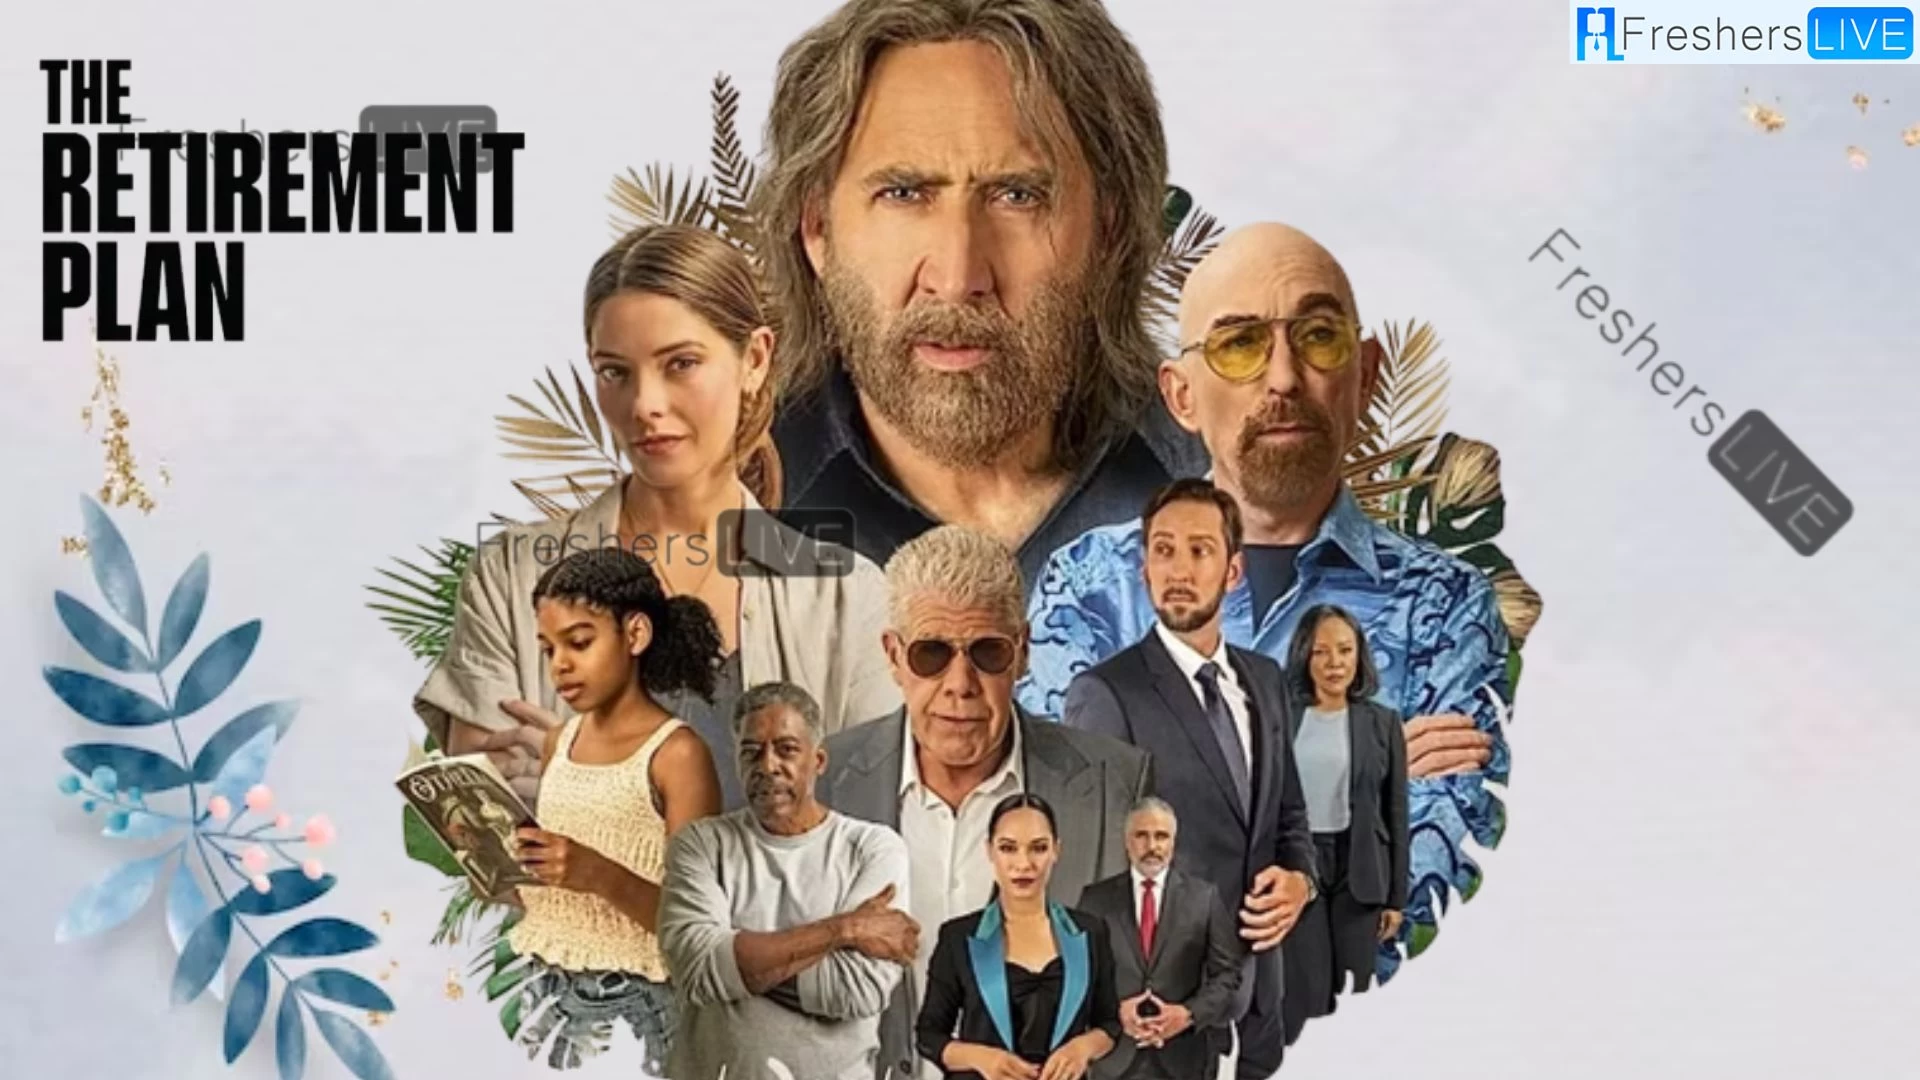 The Retirement Plan 2023 Movie Ending Explained, Cast, Plot, Release Date, and Trailer